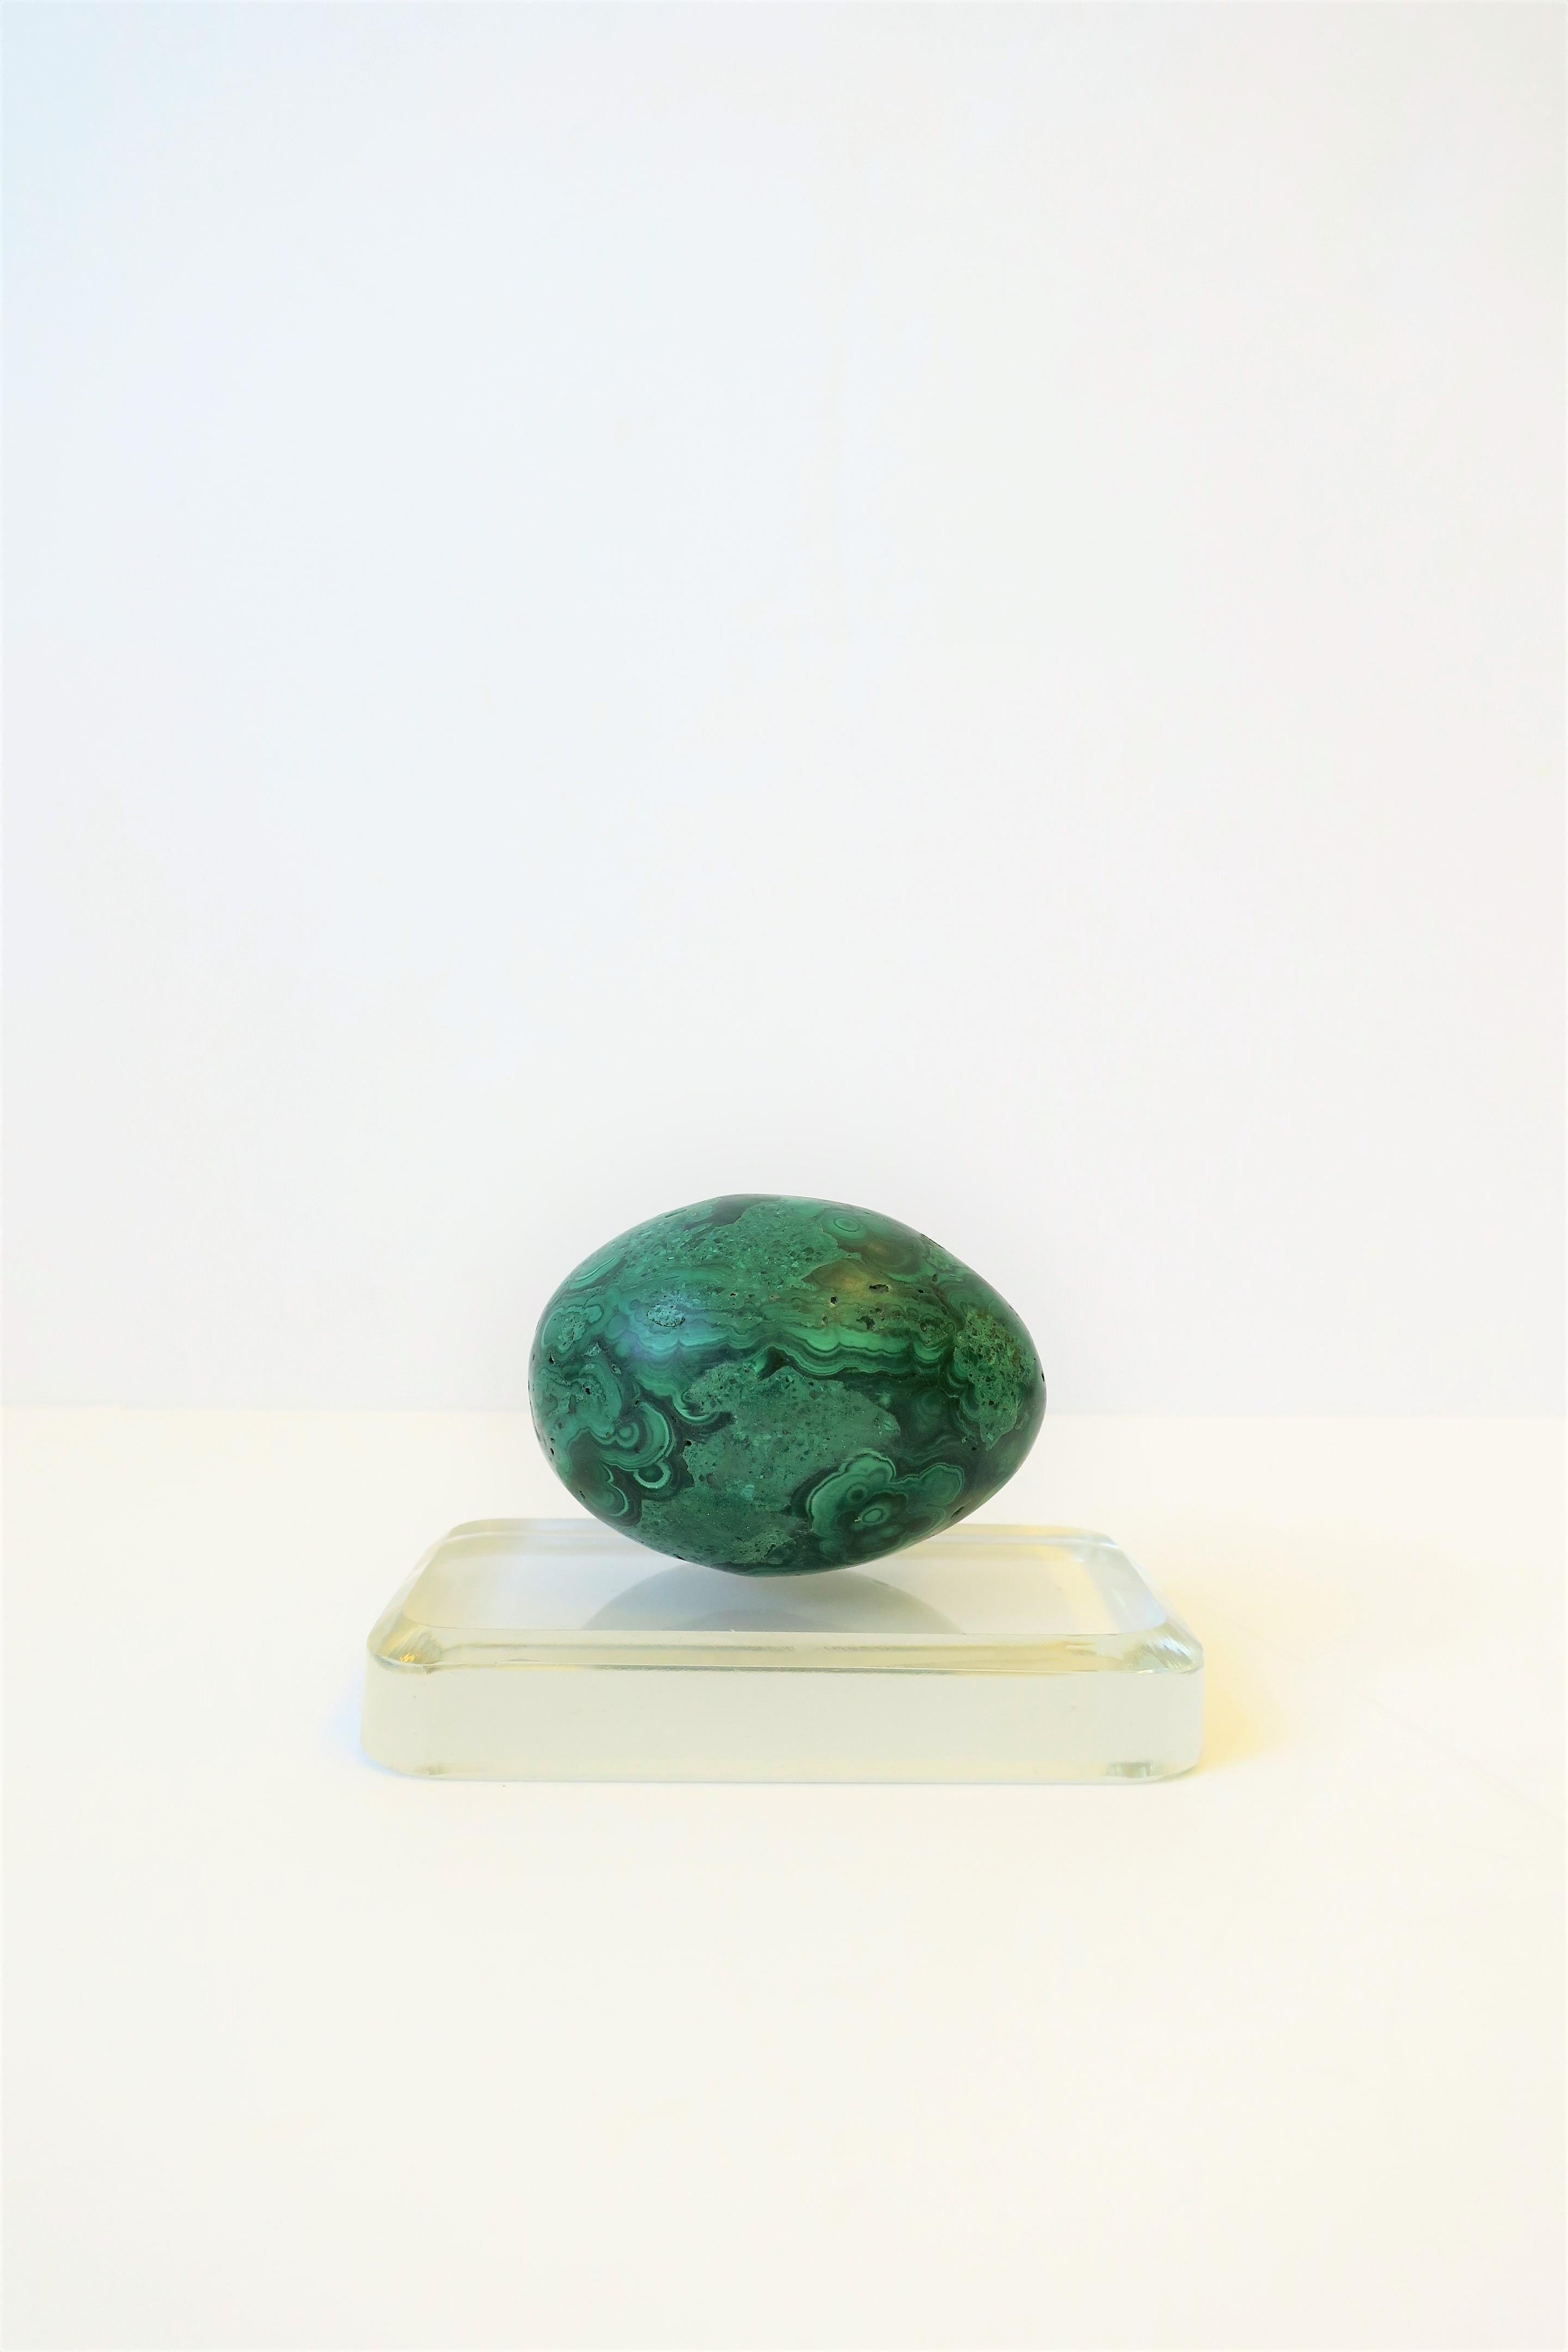 A beautiful and substantial green malachite decorative object sculpture piece in an egg shape form on a clear crystal glass plinth base. 

Malachite measures: 2